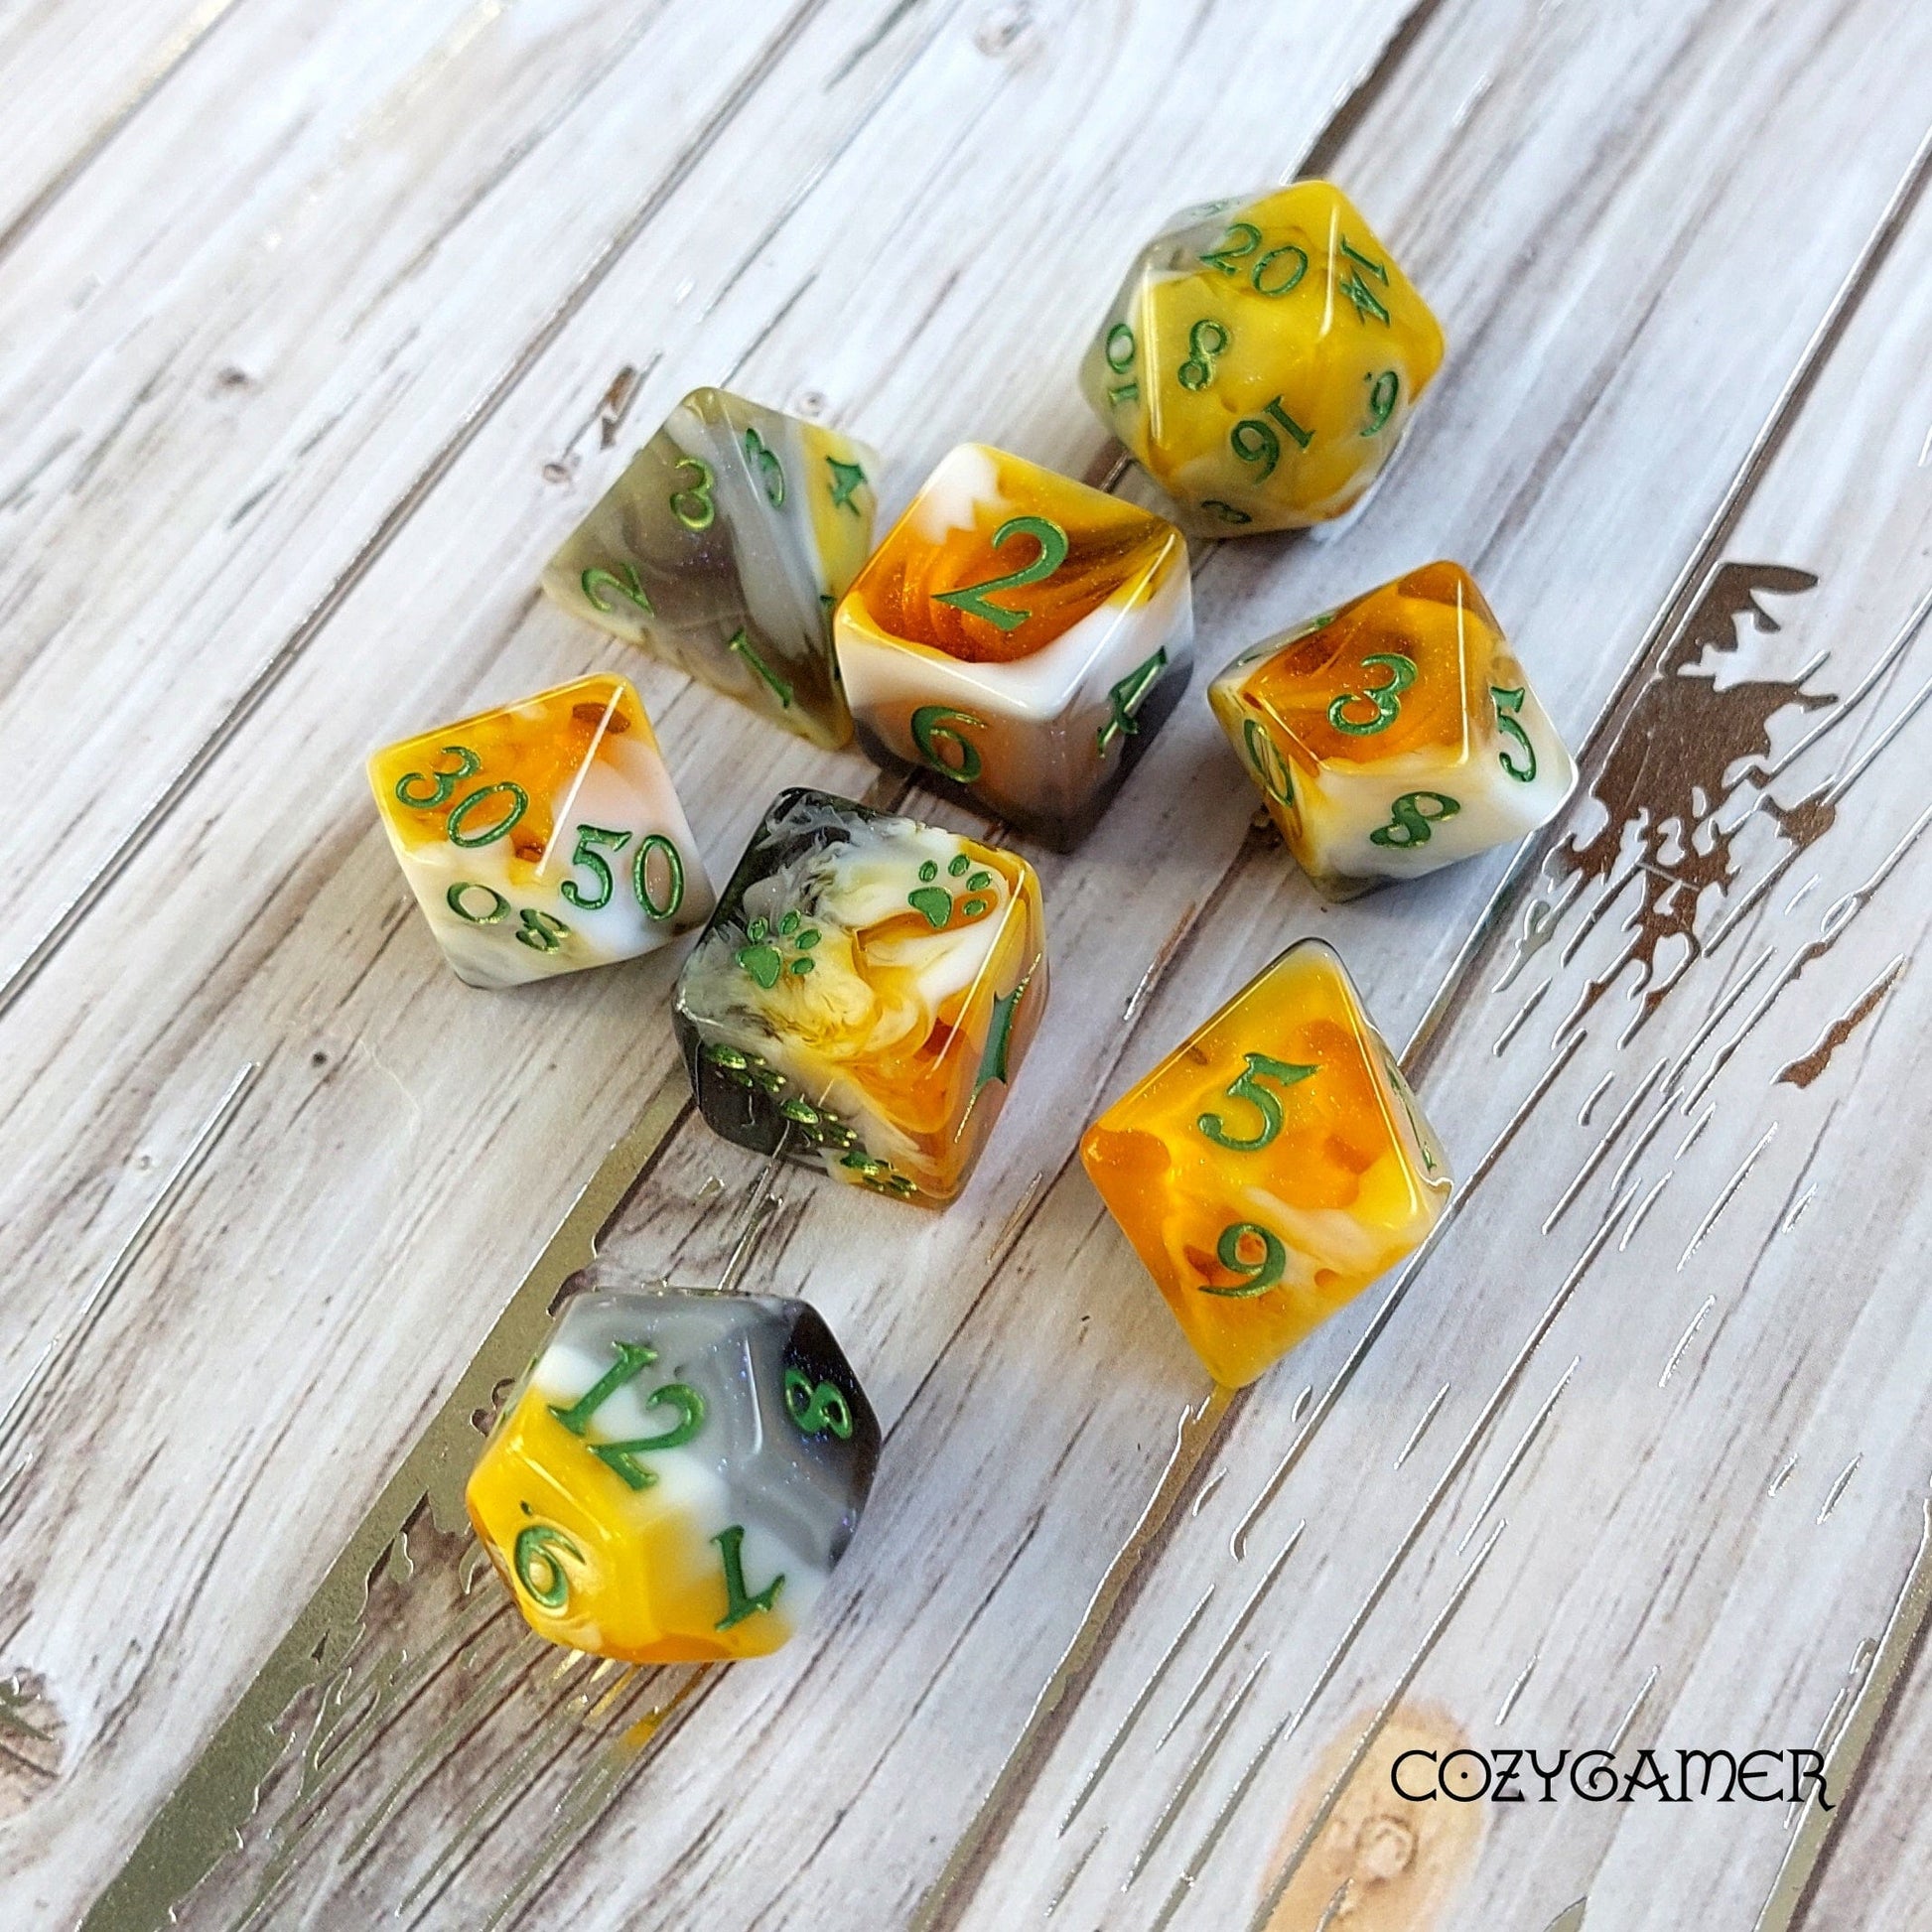 Calico Cat Dice Set, Marbled Orange, Black, and White Cat themed DND Dice. 12 Piece, 8 Piece, D10, and D6 Sets 8 Piece Set